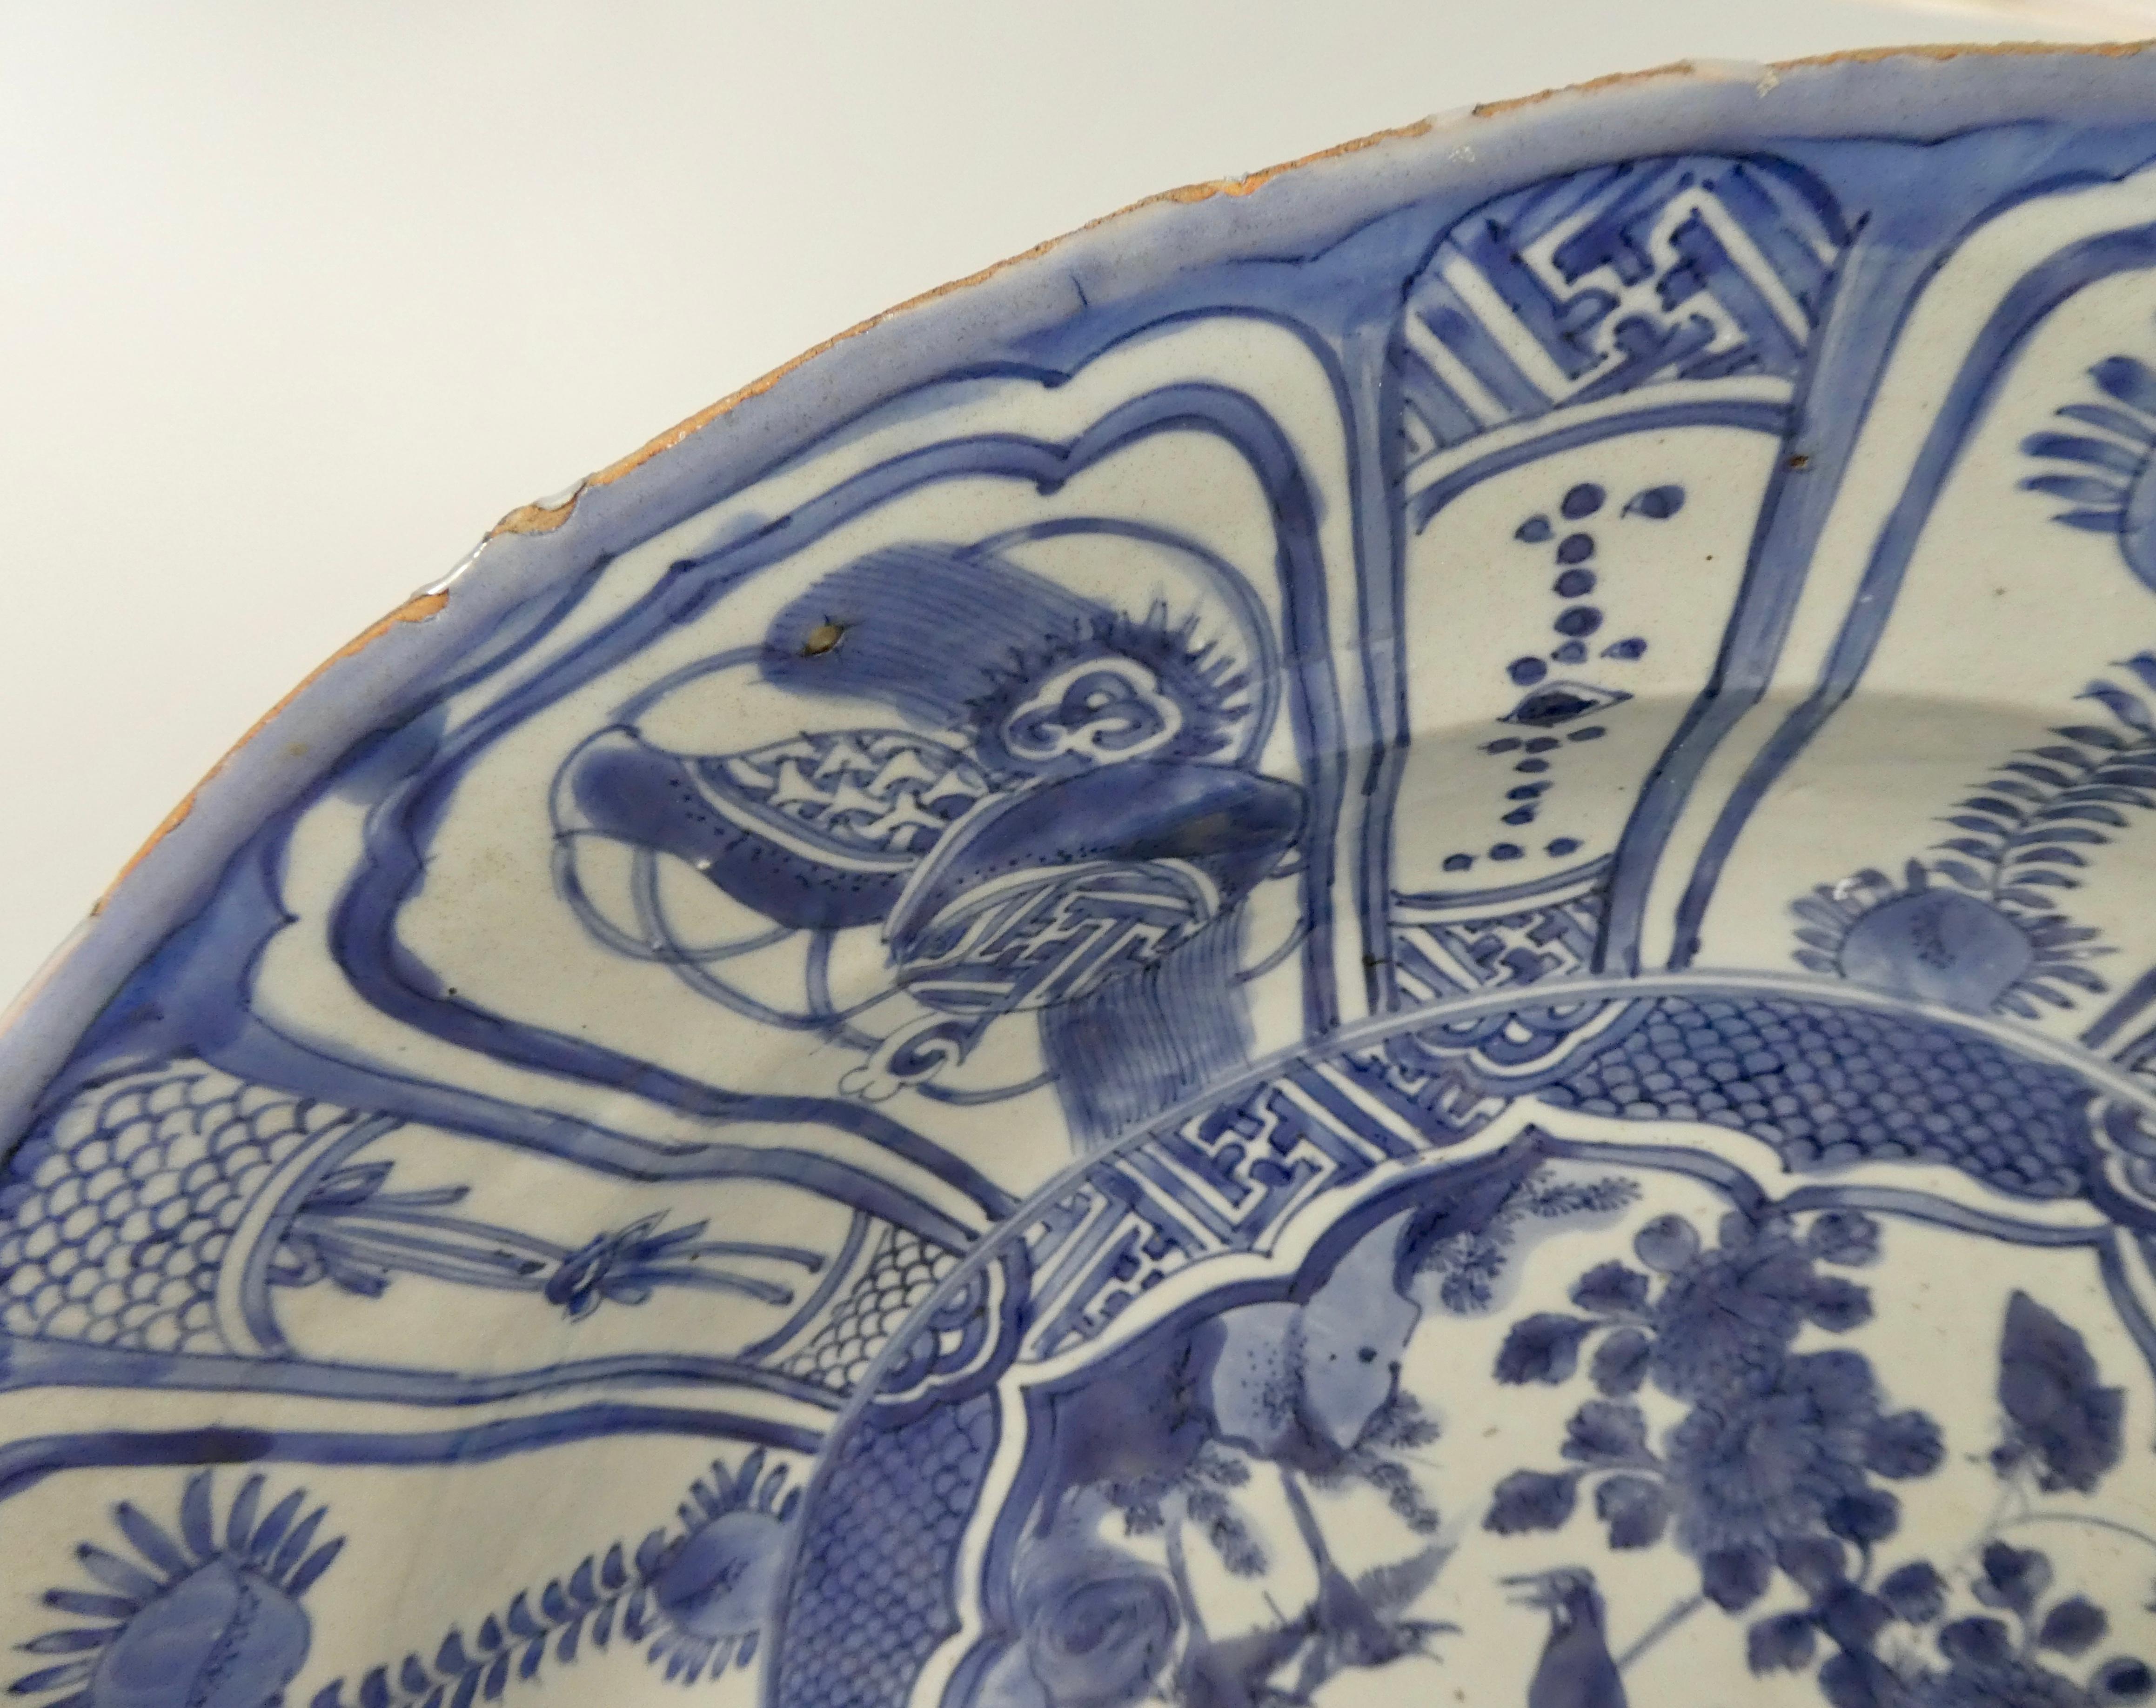 Ming Chinese ‘Kraak’ Porcelain Charger, Wanli Period '1573-1619'